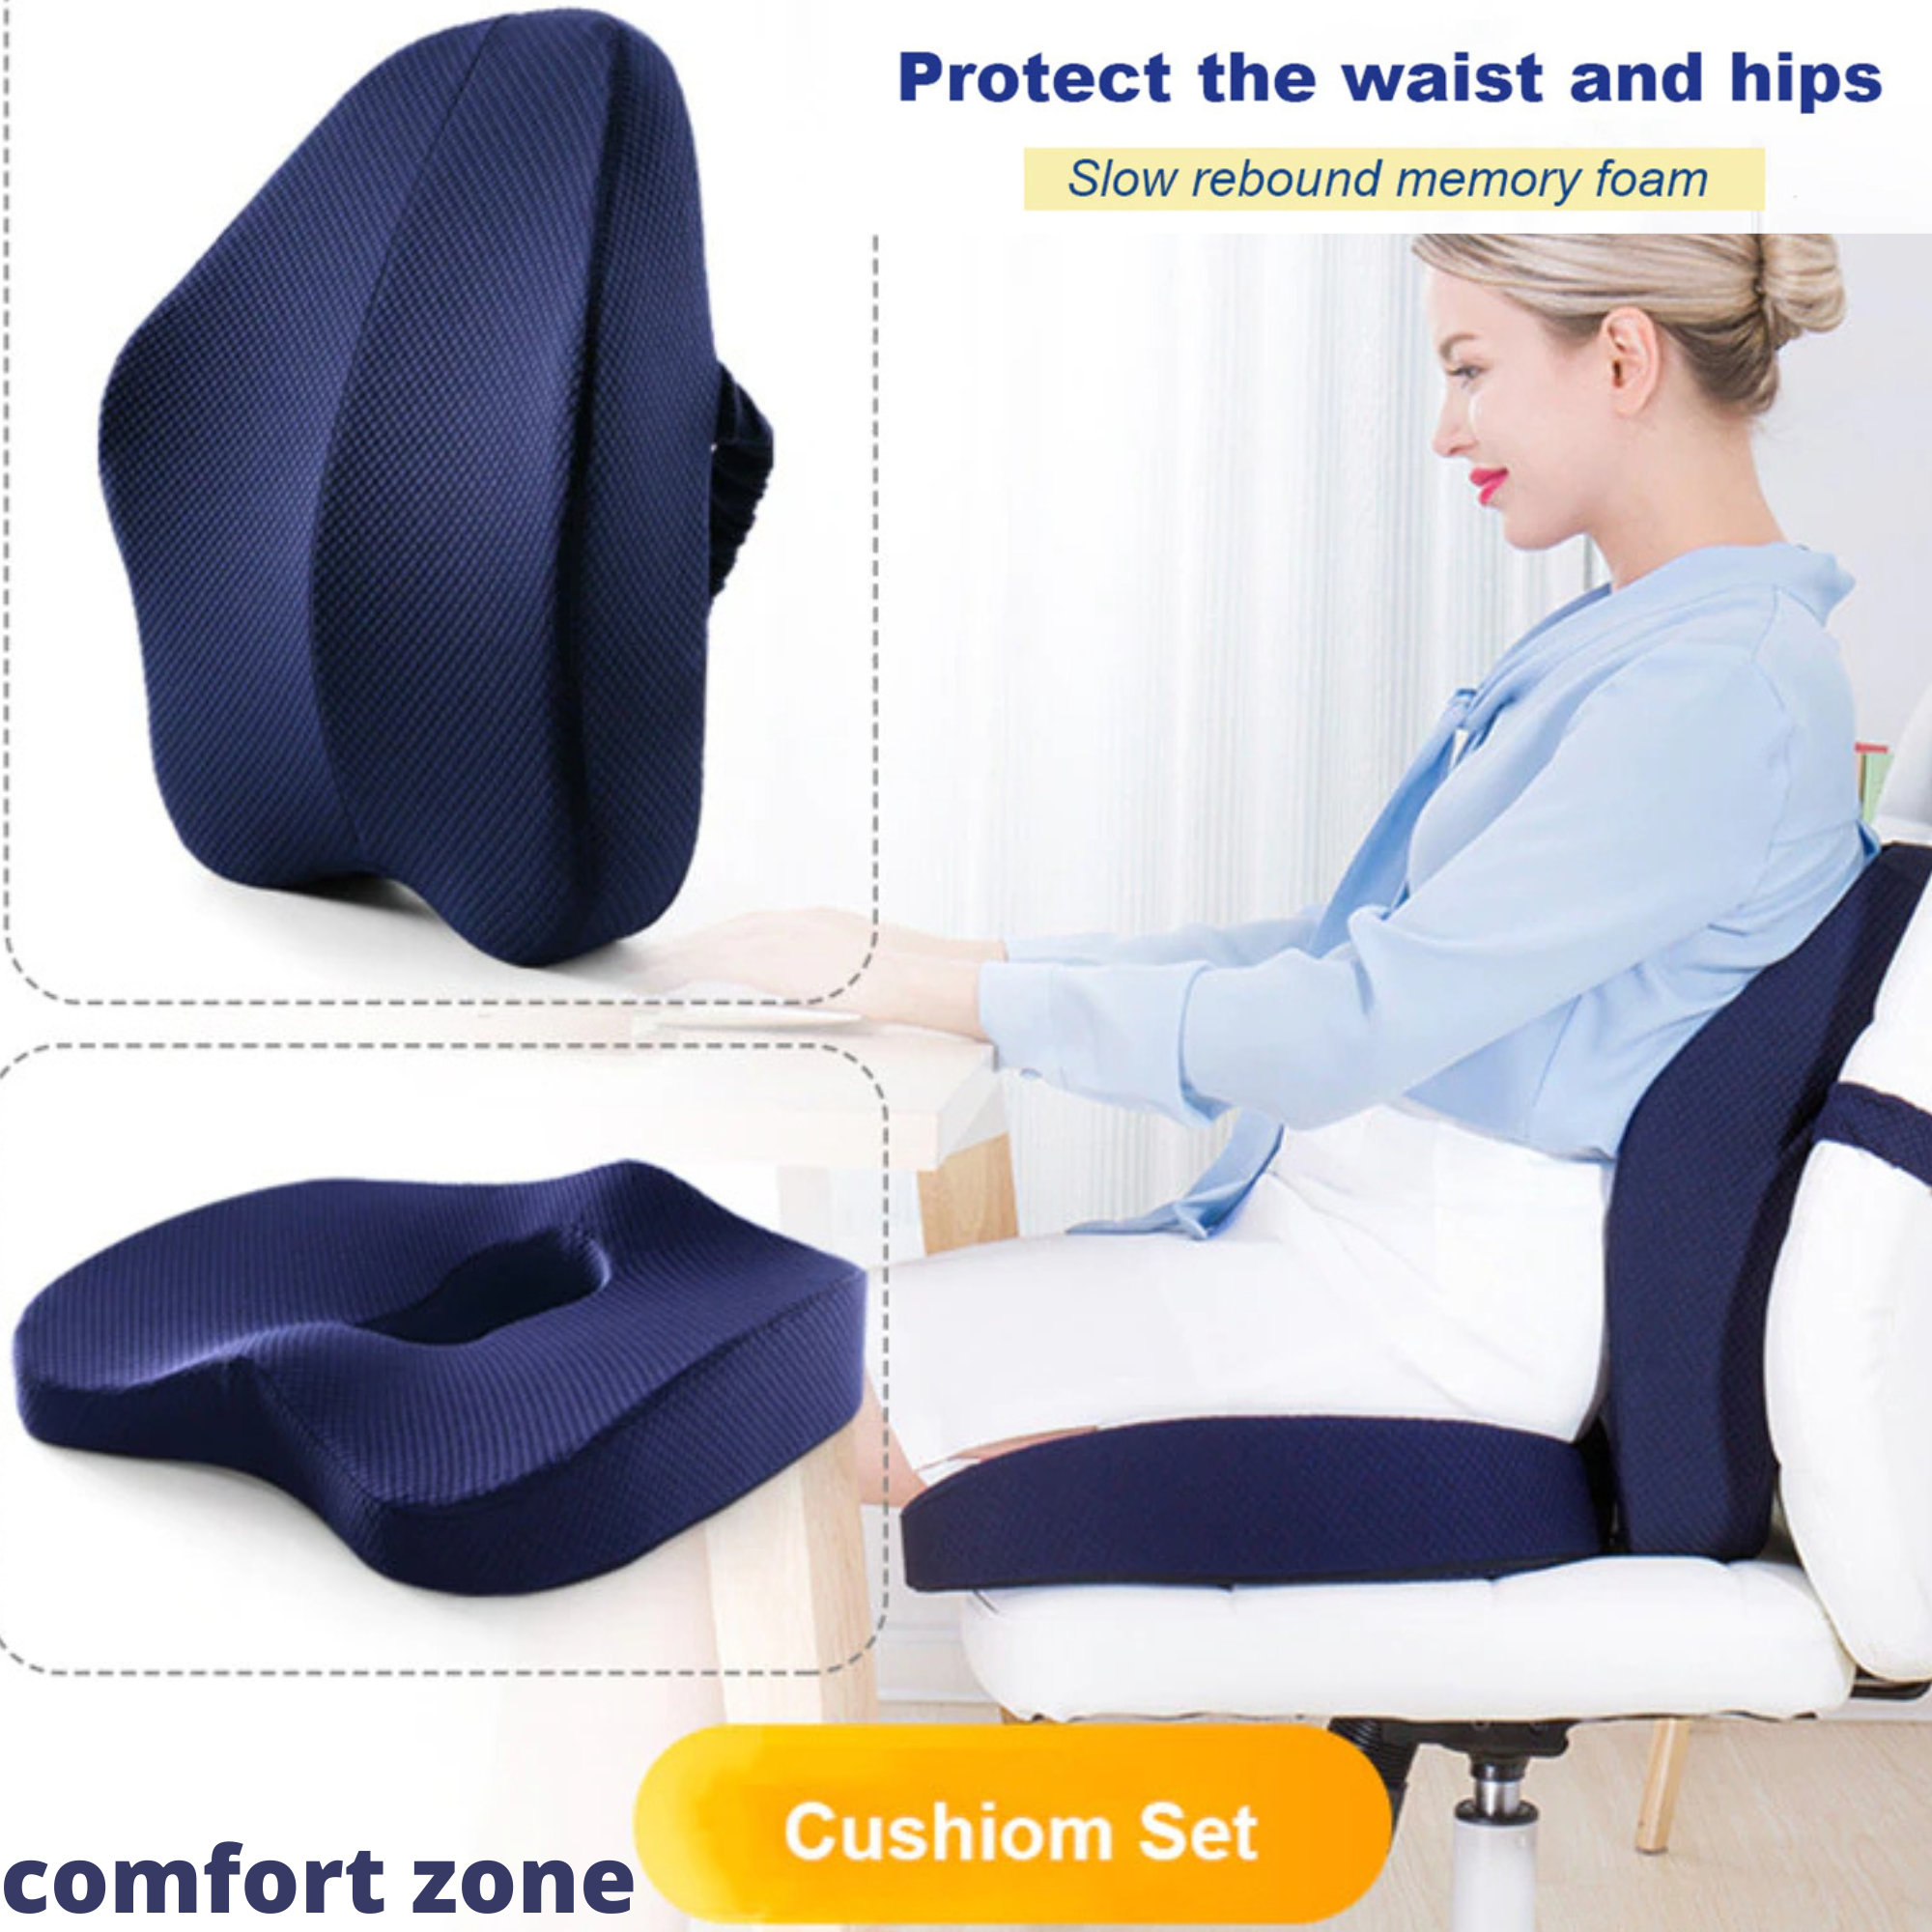 Sleepavo Gel Seat Cushion - Seat Cushions for Office Chairs for Sciatica  Pain Relief - Car Seat Cushion - Tailbone Pain Relief Memory Foam Butt  Cushion Cooling Gel Computer Seat Pad (Navy